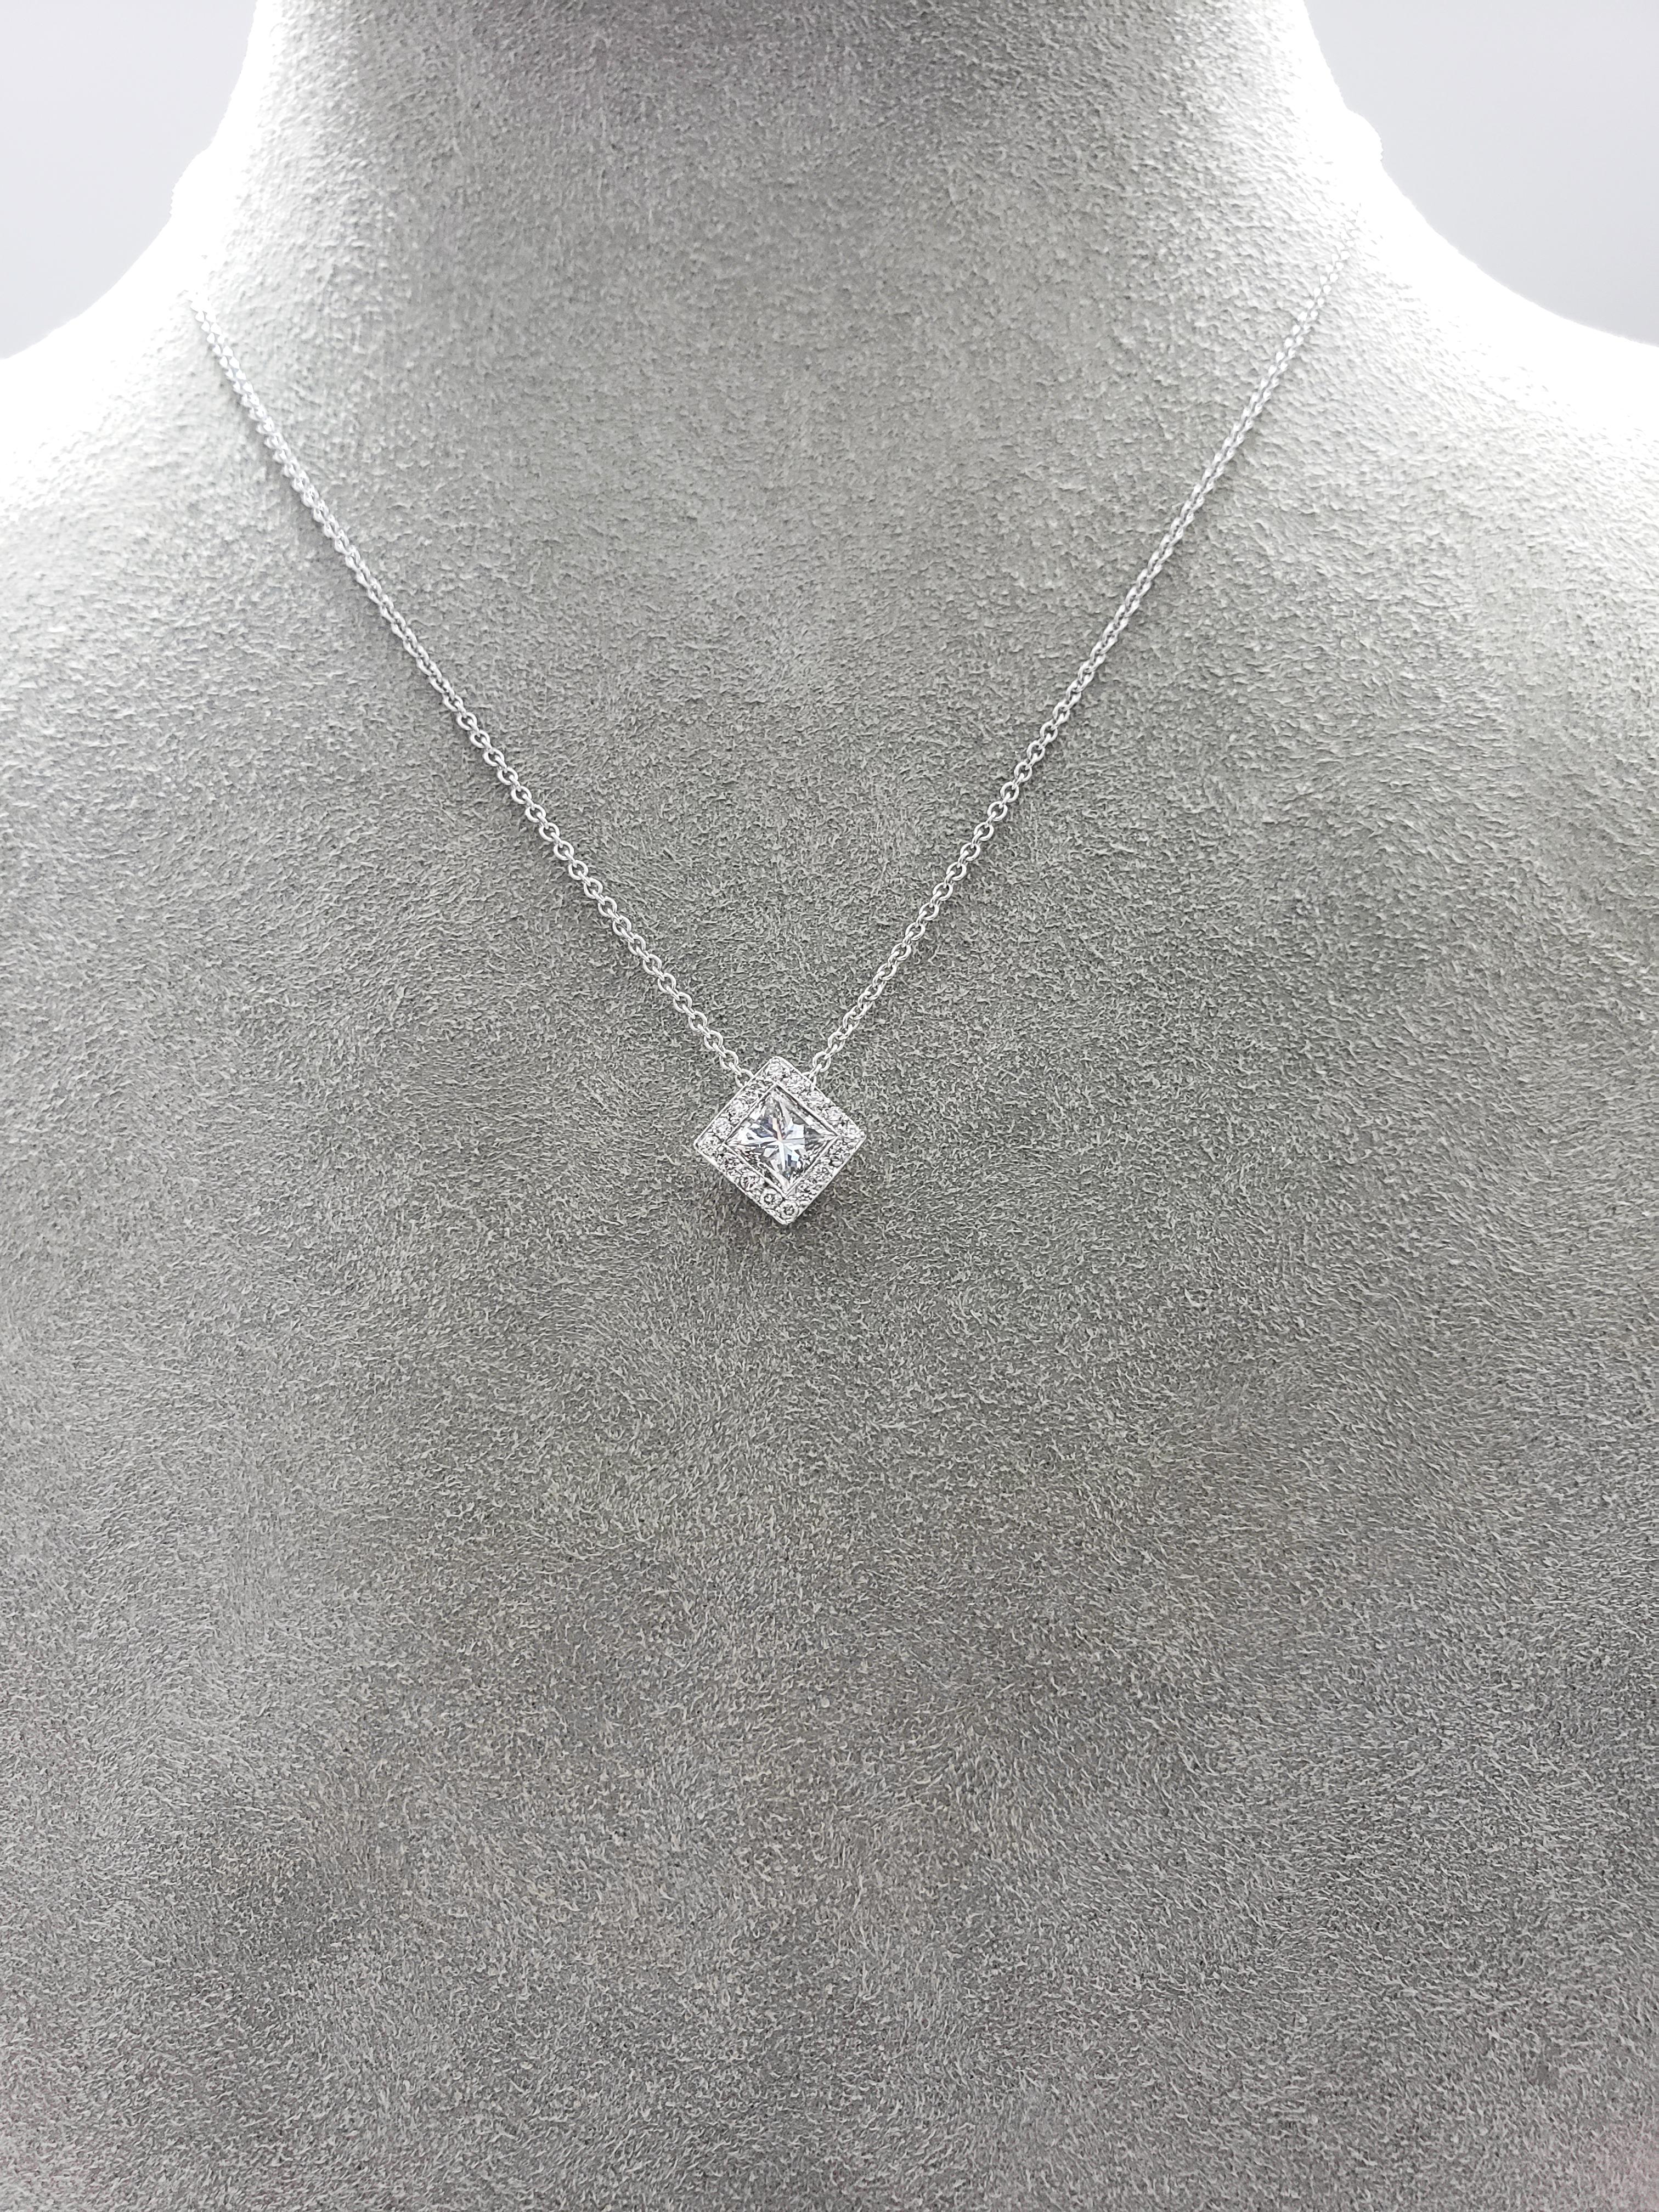 Features a 0.78 carat princess cut diamond surrounded by a row of round brilliant diamonds. Diamonds weigh 0.87 carats total. Made in 18 karat white gold. Suspended on an 18 inch white gold chain.

Style available in different price ranges. Prices